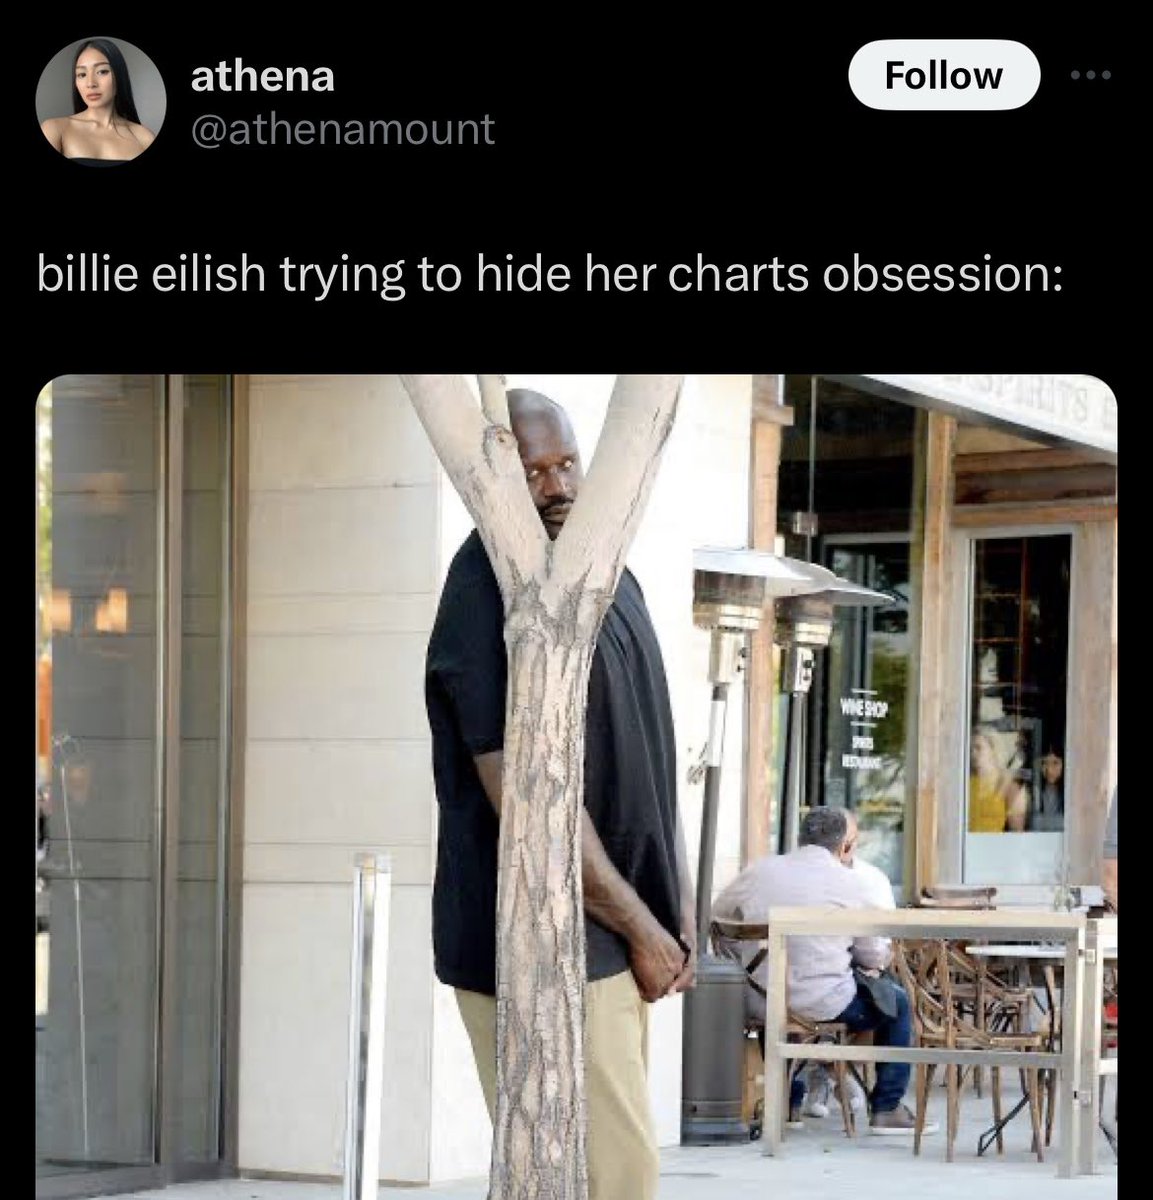 What’s funny is Billie never claimed to not care about charts. She said she cares more about the earth we live on more than a number & explained how to sustainably release vinyls and CDs that don’t hurt the environment as much. But the fanbase that cares so much about writing